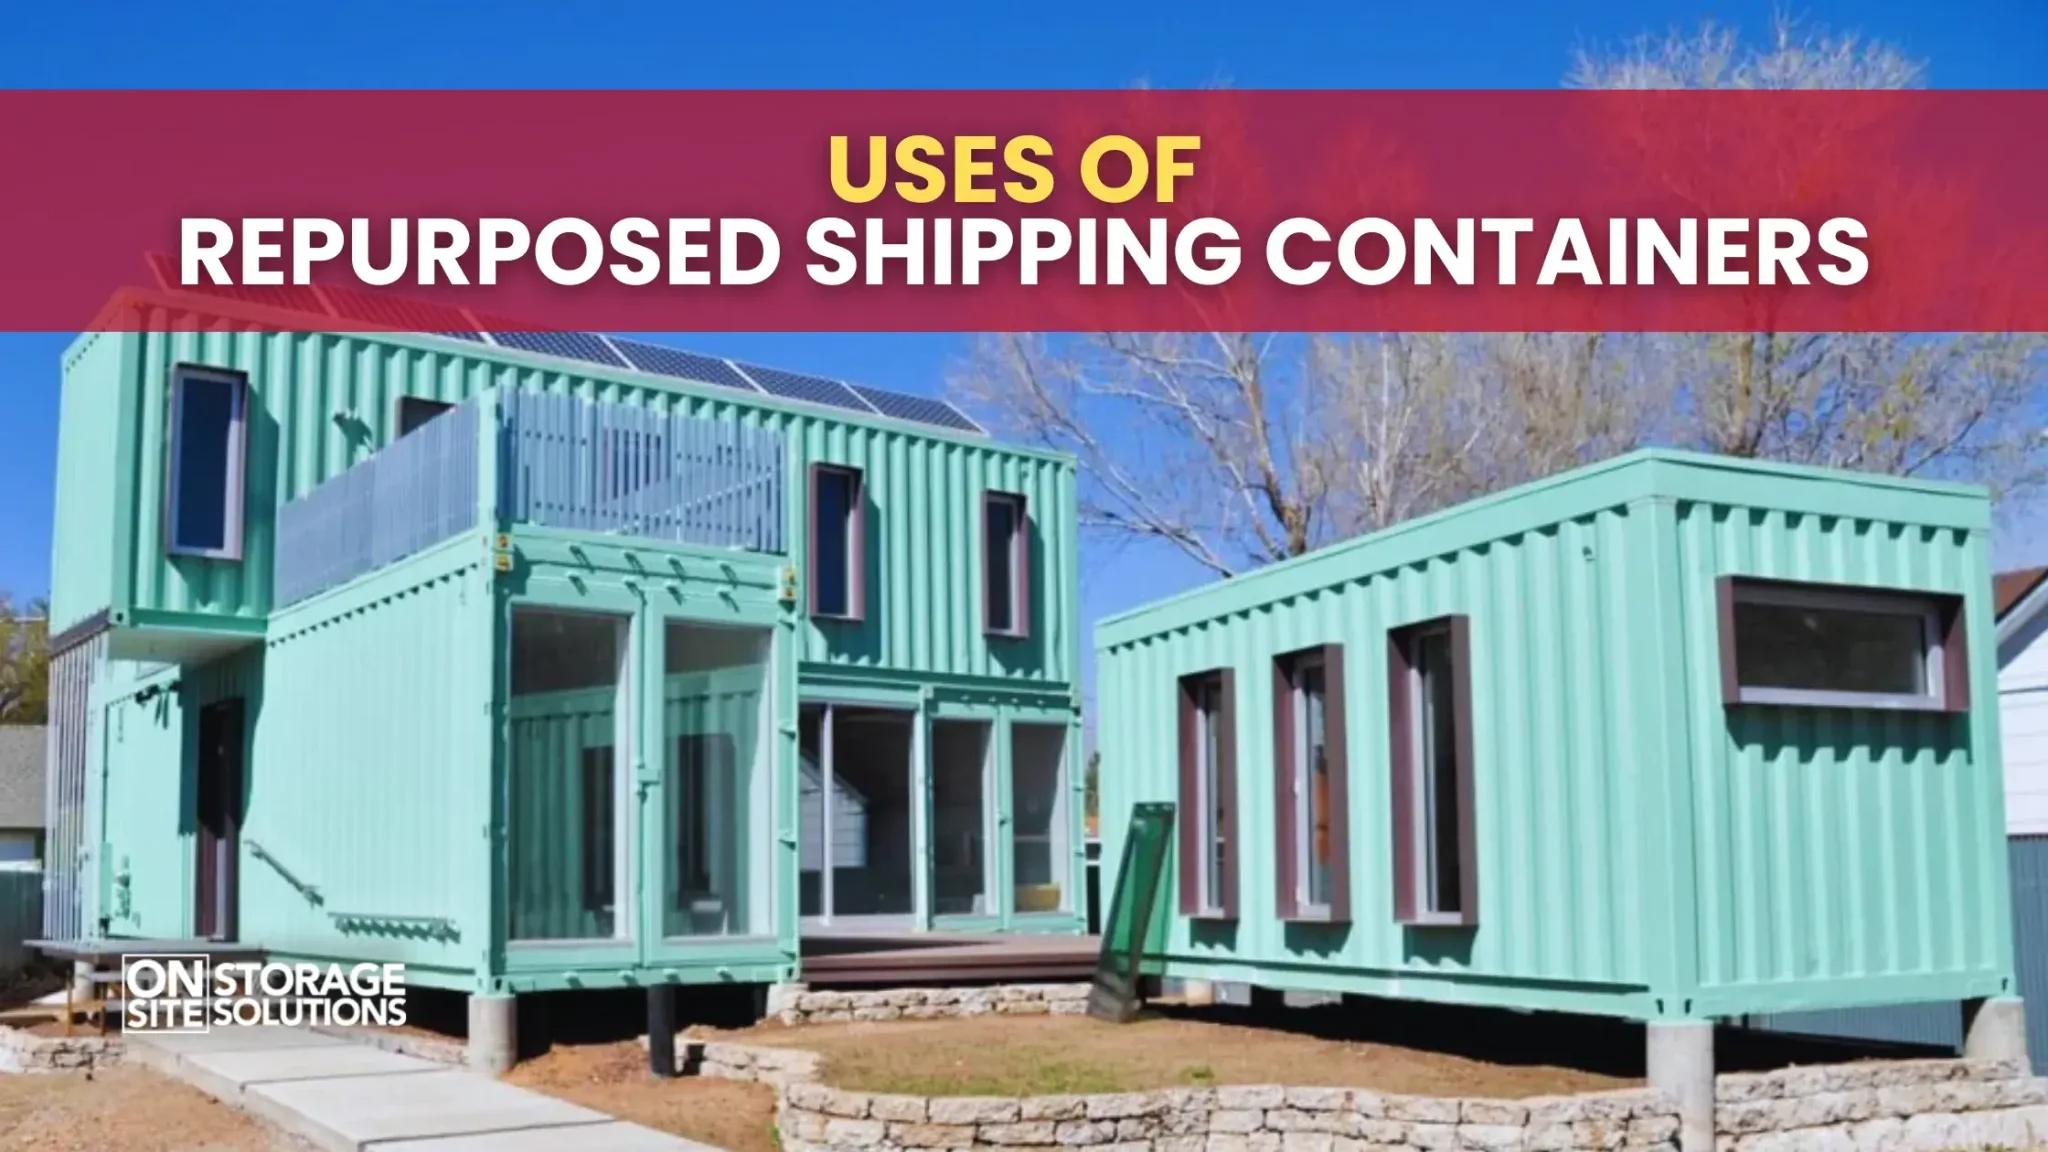 Uses of Repurposed Shipping Containers